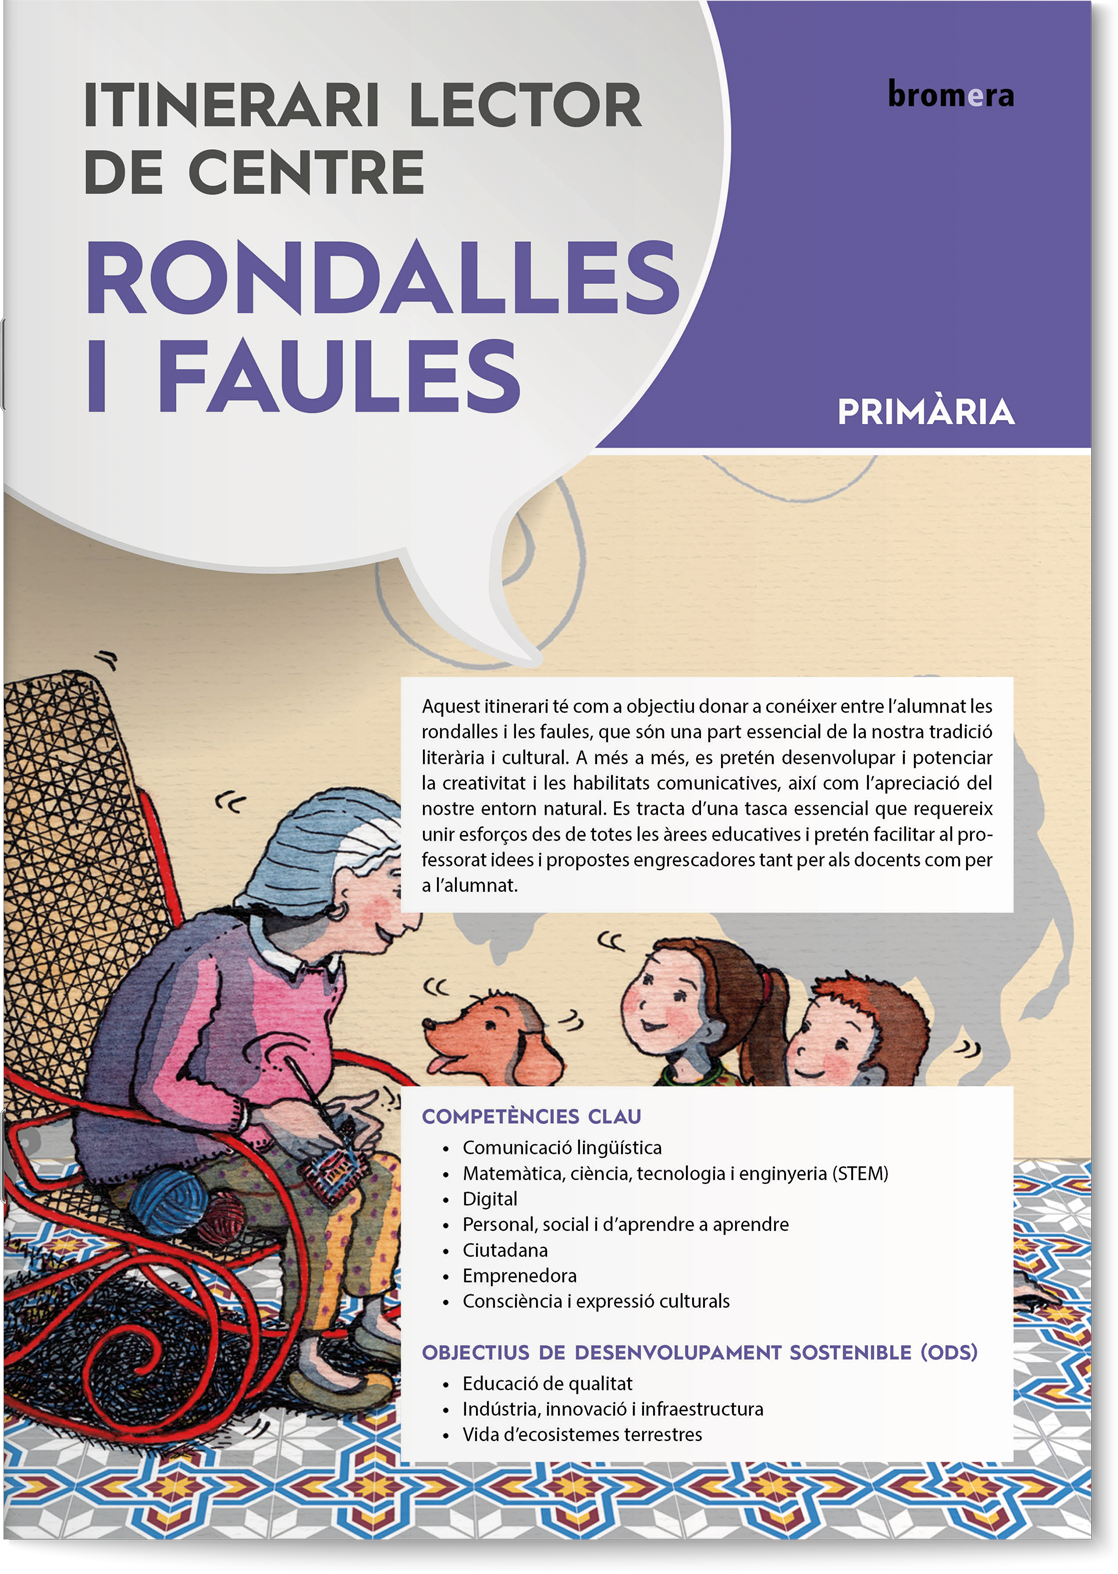 <p><strong>Rondalles i faules</strong></p>